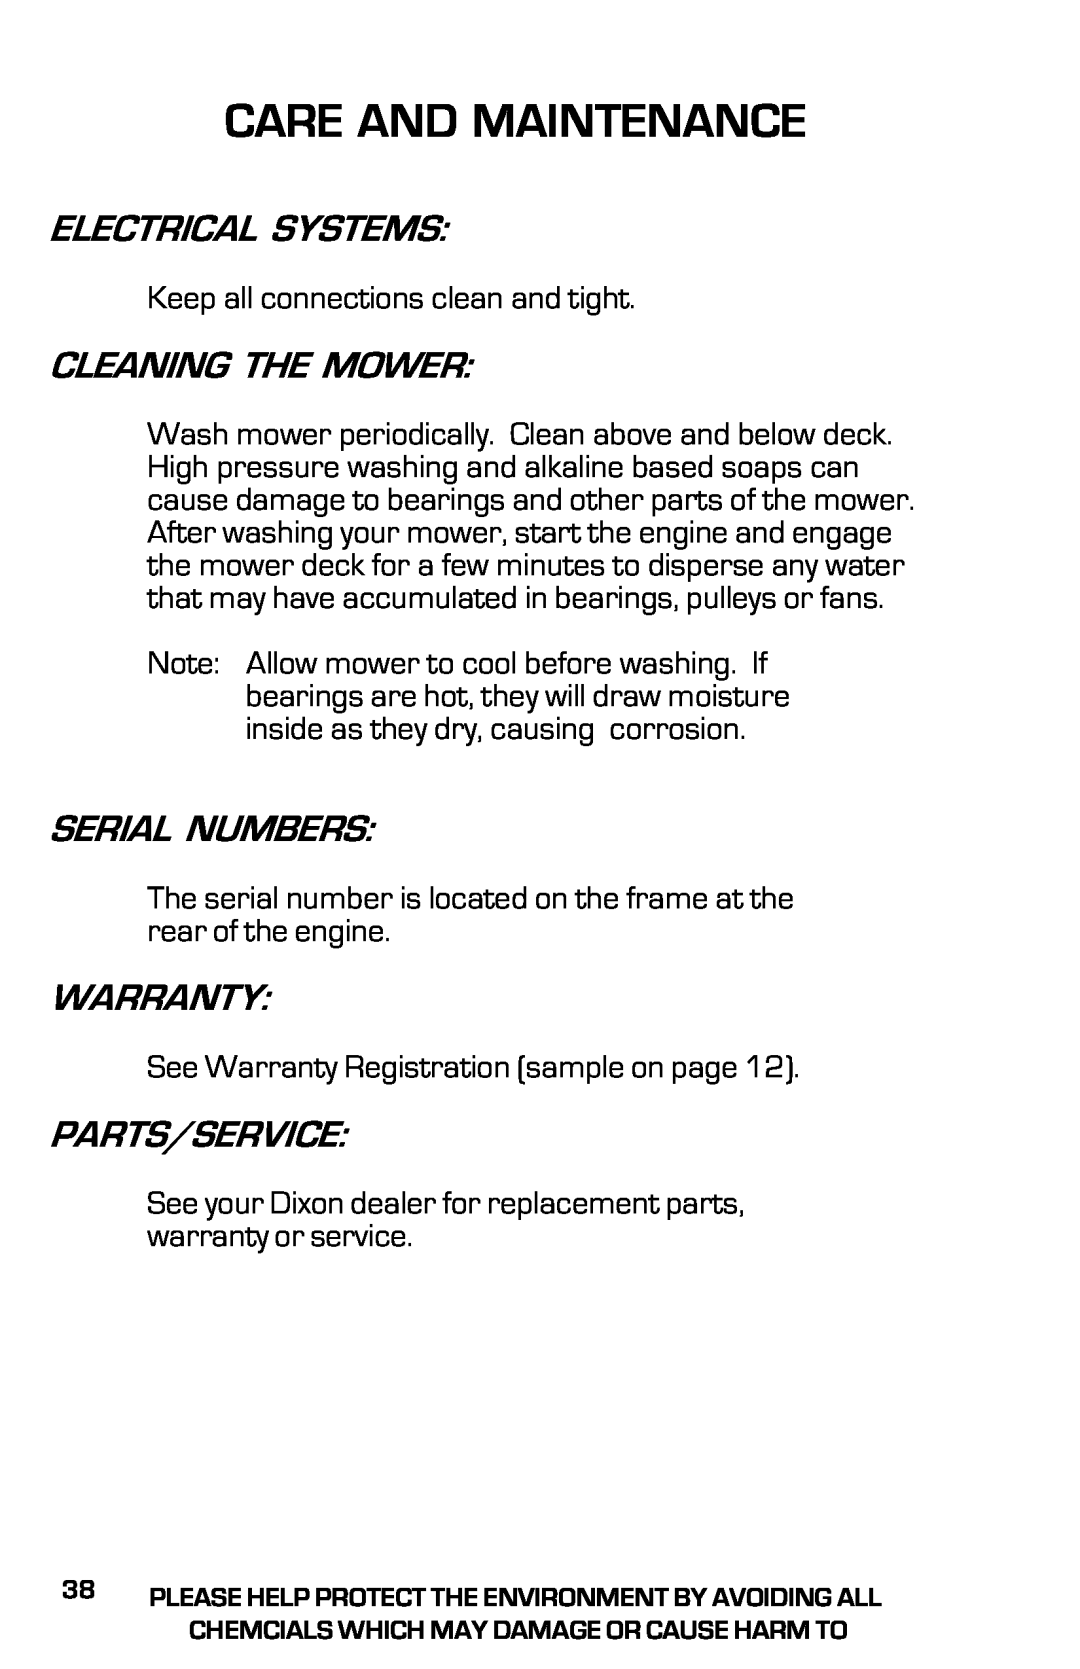 Dixon 2003 manual Care And Maintenance, Electrical Systems, Cleaning The Mower, Serial Numbers, Warranty, Parts/Service 